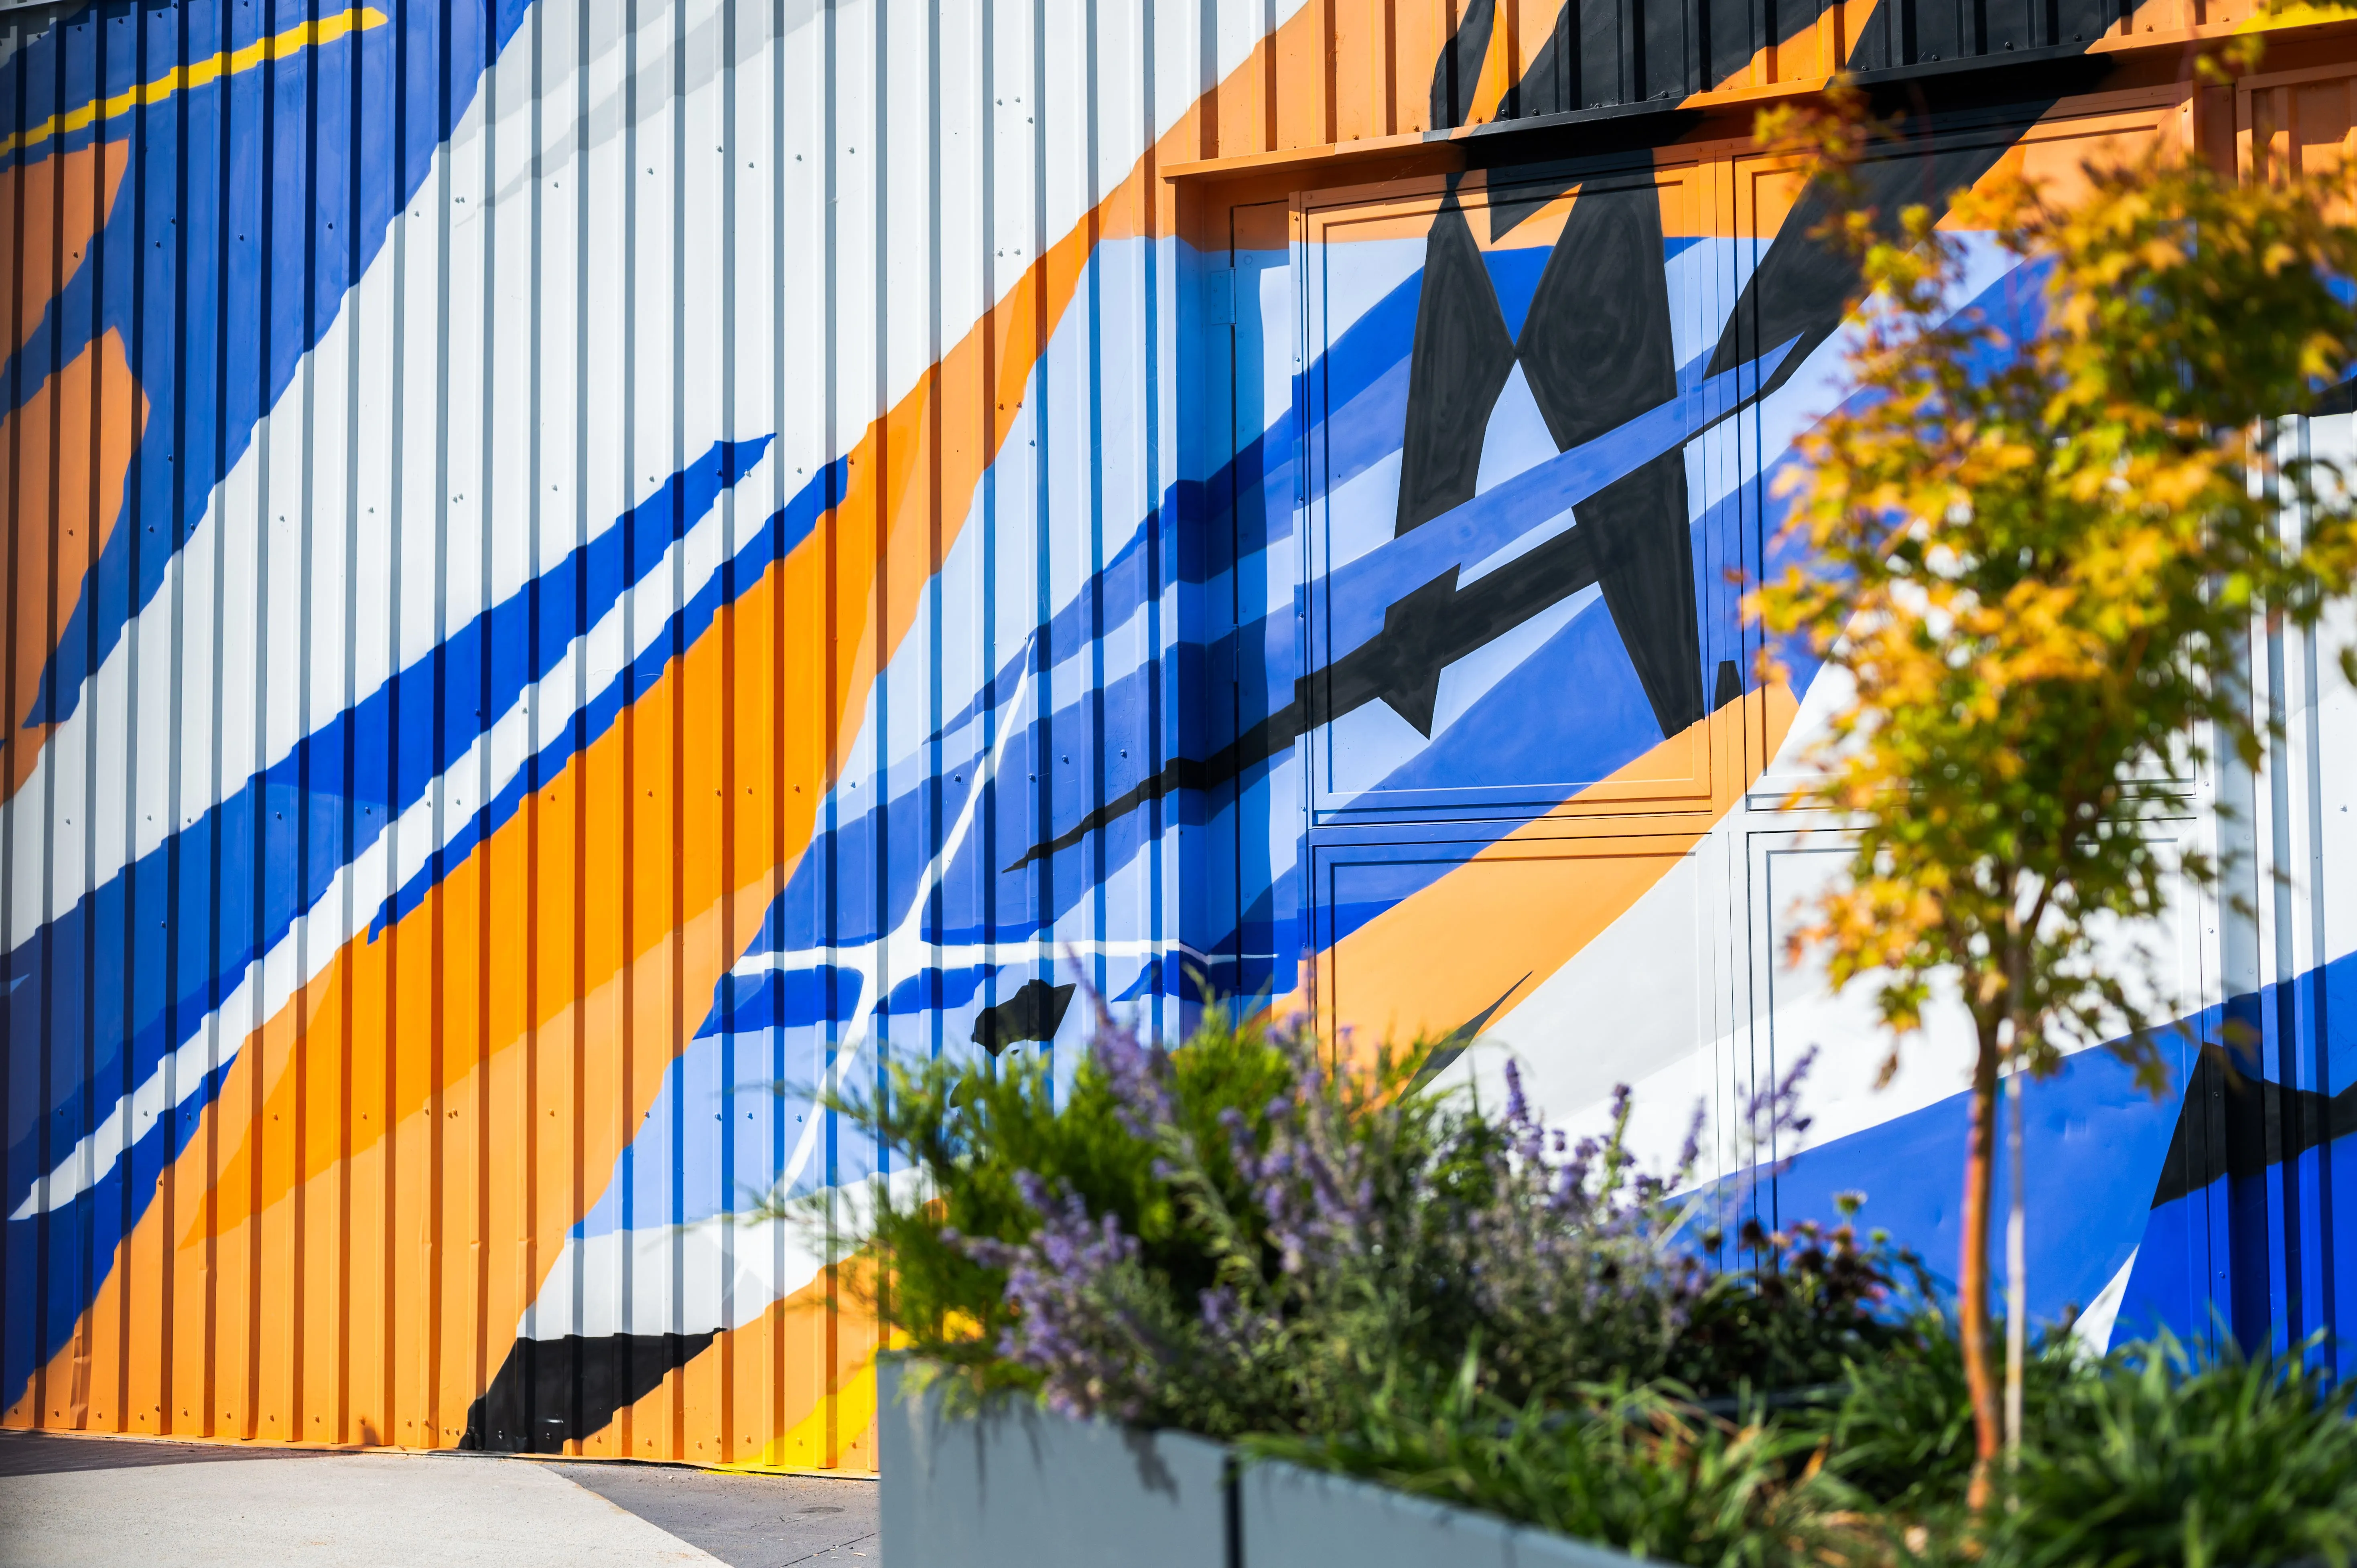 Colorful abstract mural on corrugated metal surface with geometric shapes in blue, orange, and white, framed by foliage in the foreground.